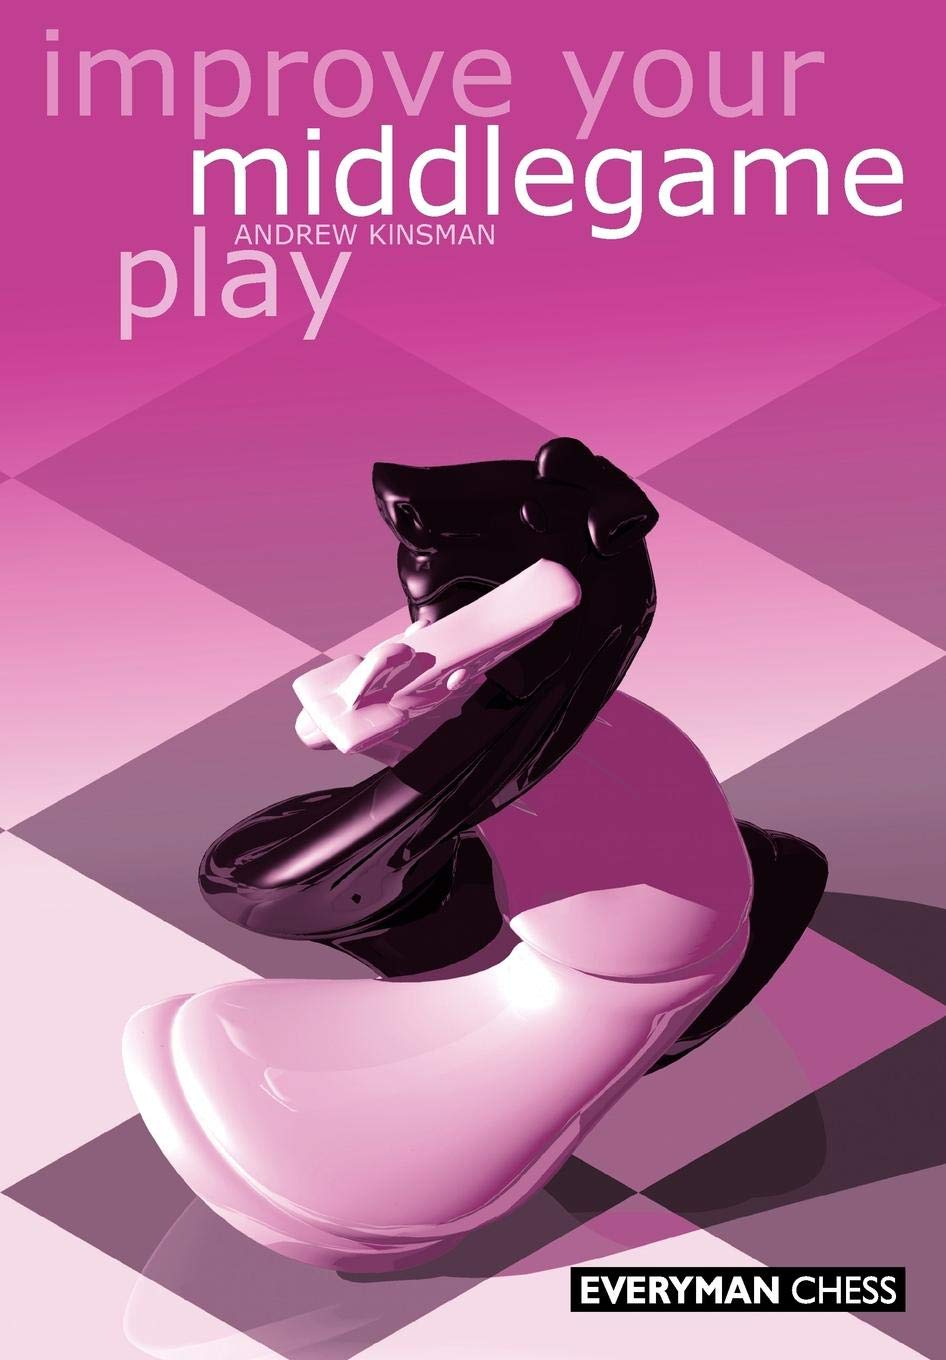 Improve Your Middlegame Play by Andrew Kinsman